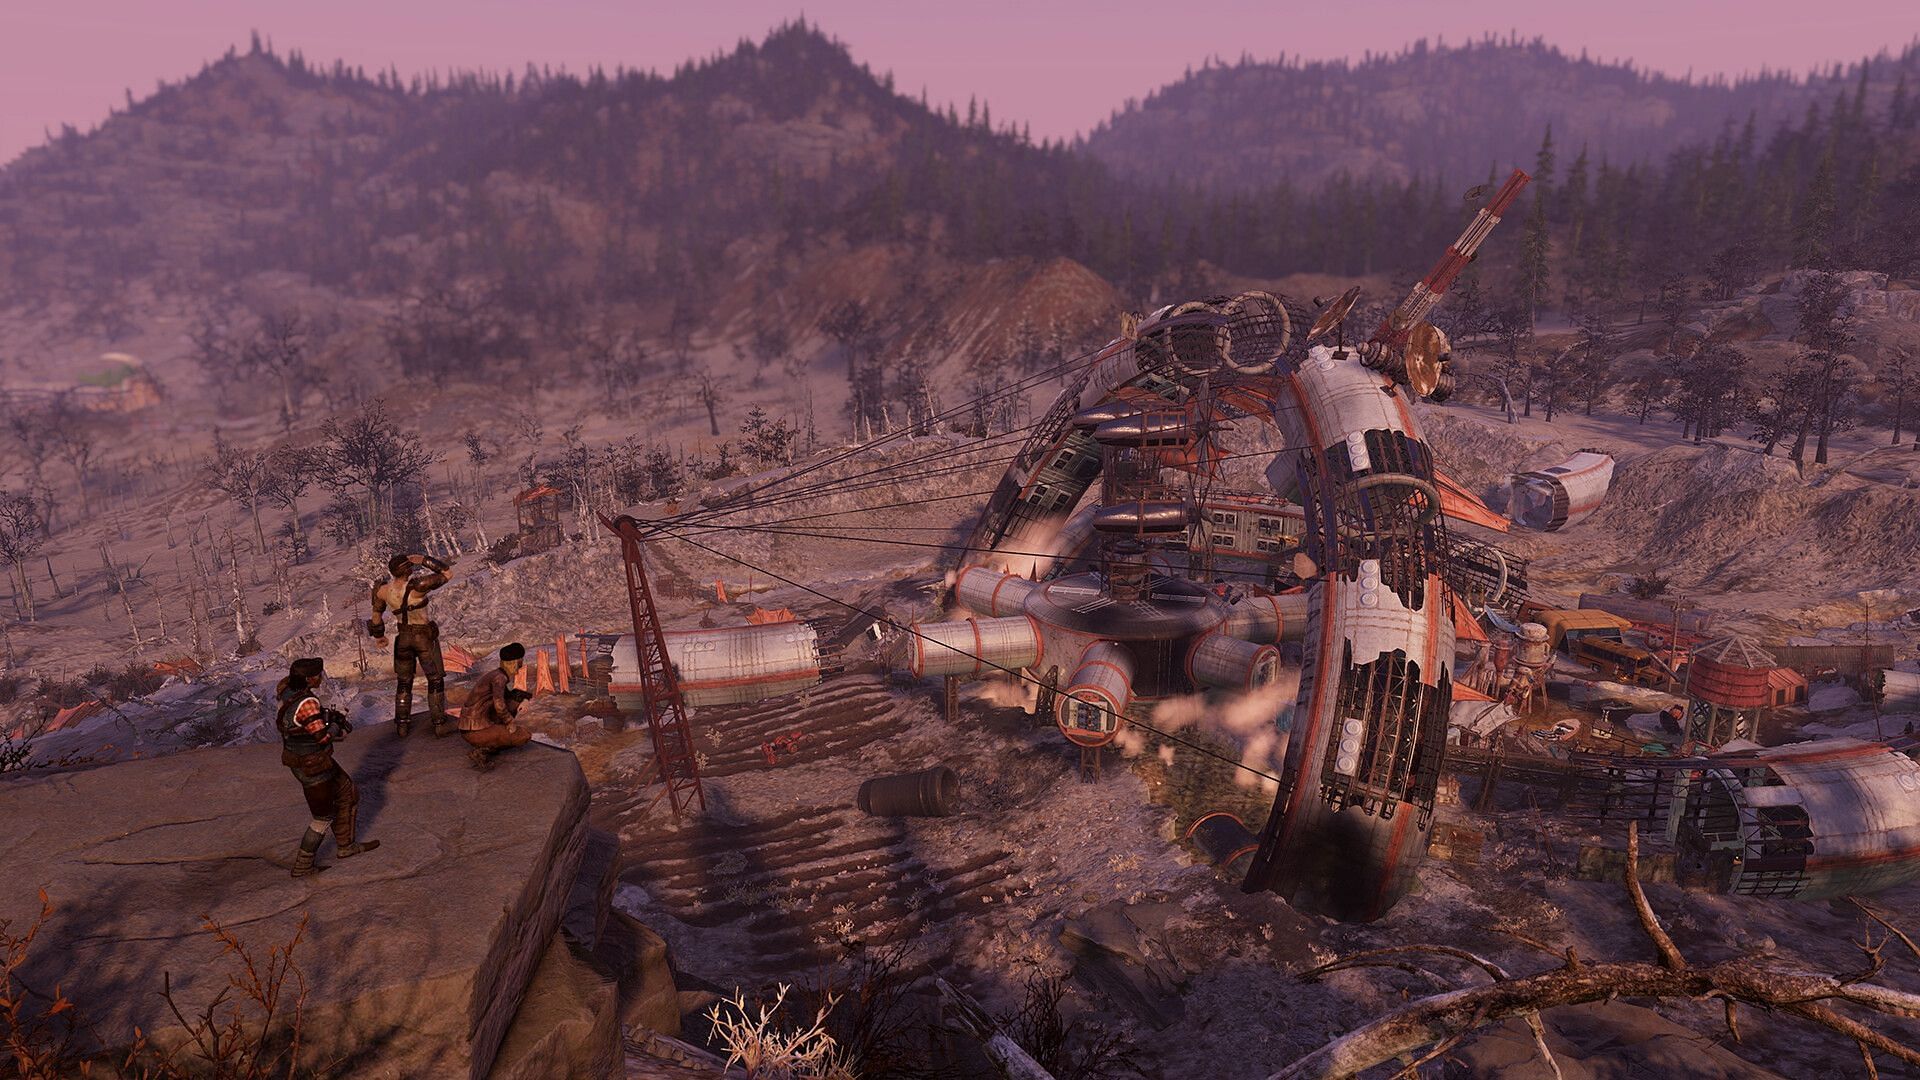 Where to look for Terminals in Fallout 76 (image via Bethesda)